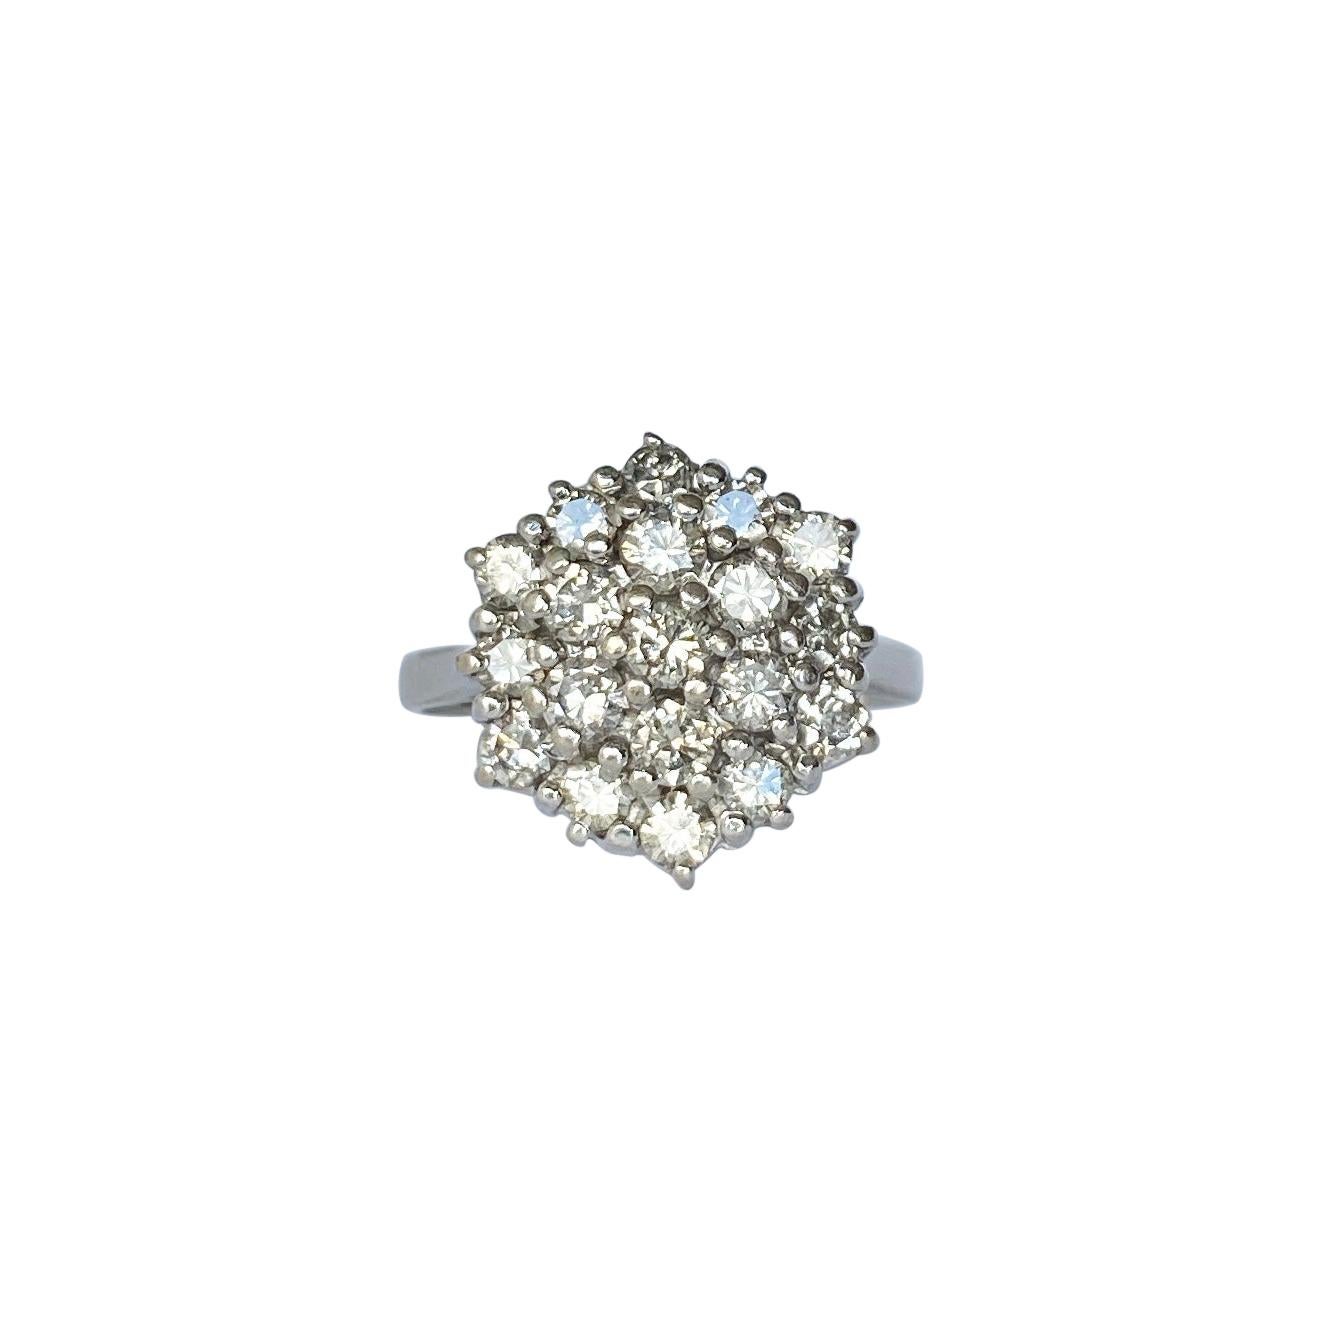 Vintage Diamond and 18 White Carat Gold Cluster Ring